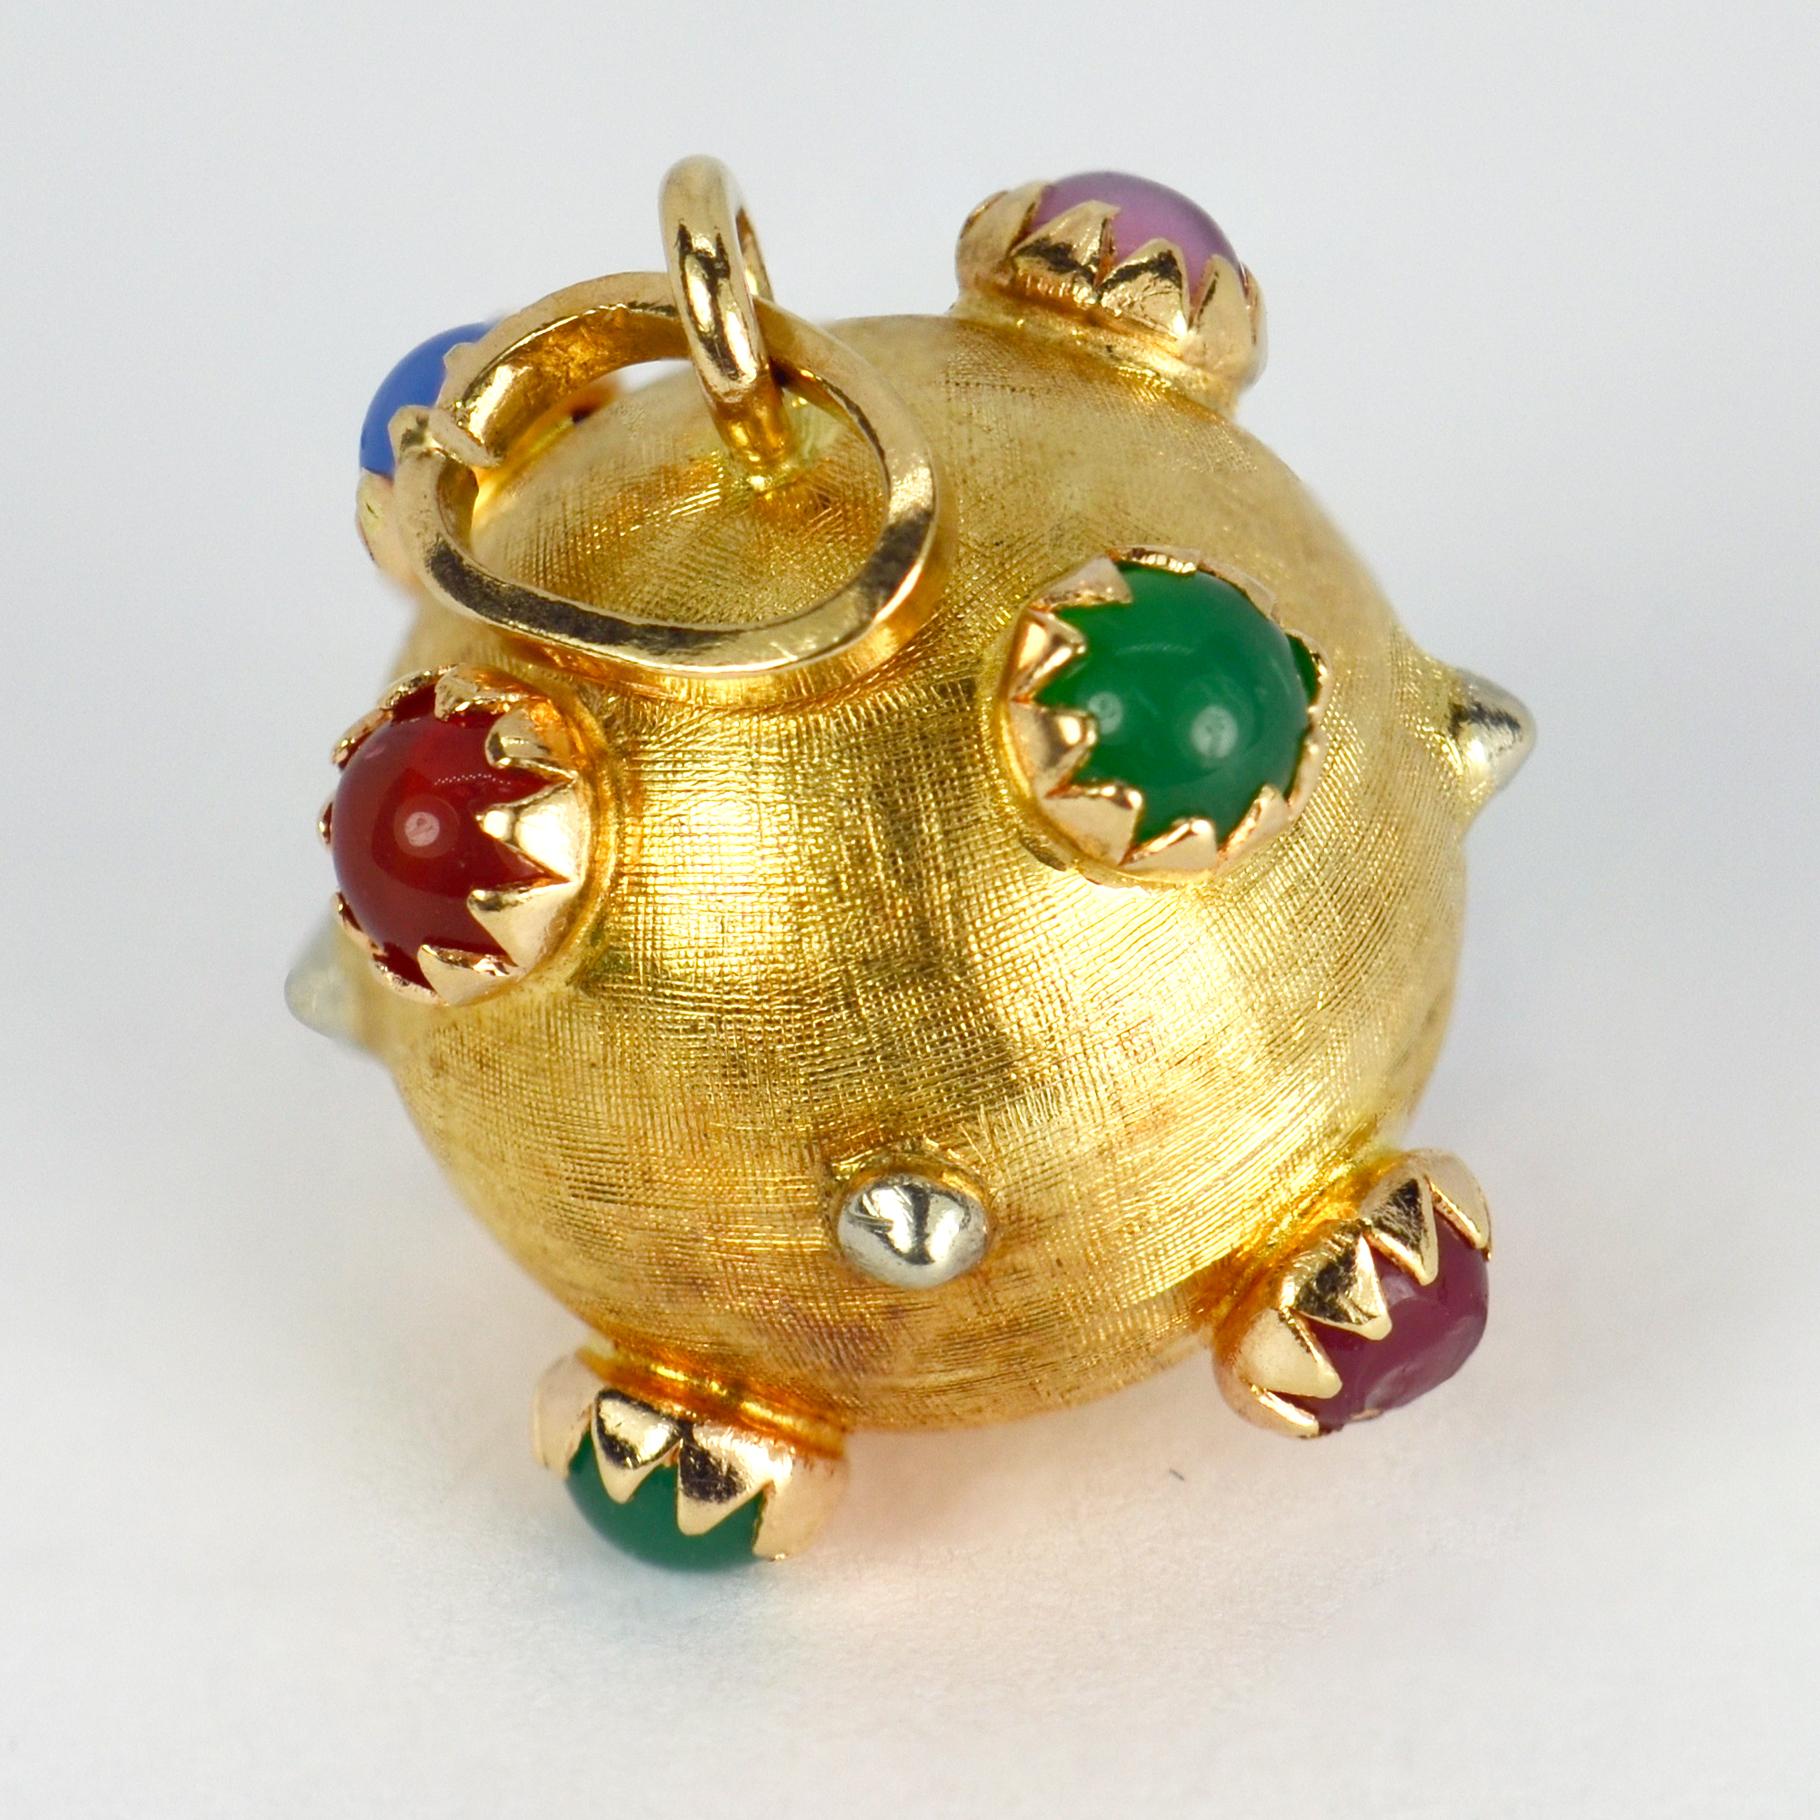 An 18 karat (18K) yellow gold charm pendant designed as a sputnik sphere set with multi-coloured paste gems. Stamped K18 for 18 karat gold.

Dimensions: 2.2 x 2.2 x 2.2 cm (not including jump ring)
Weight: 5.24 grams
